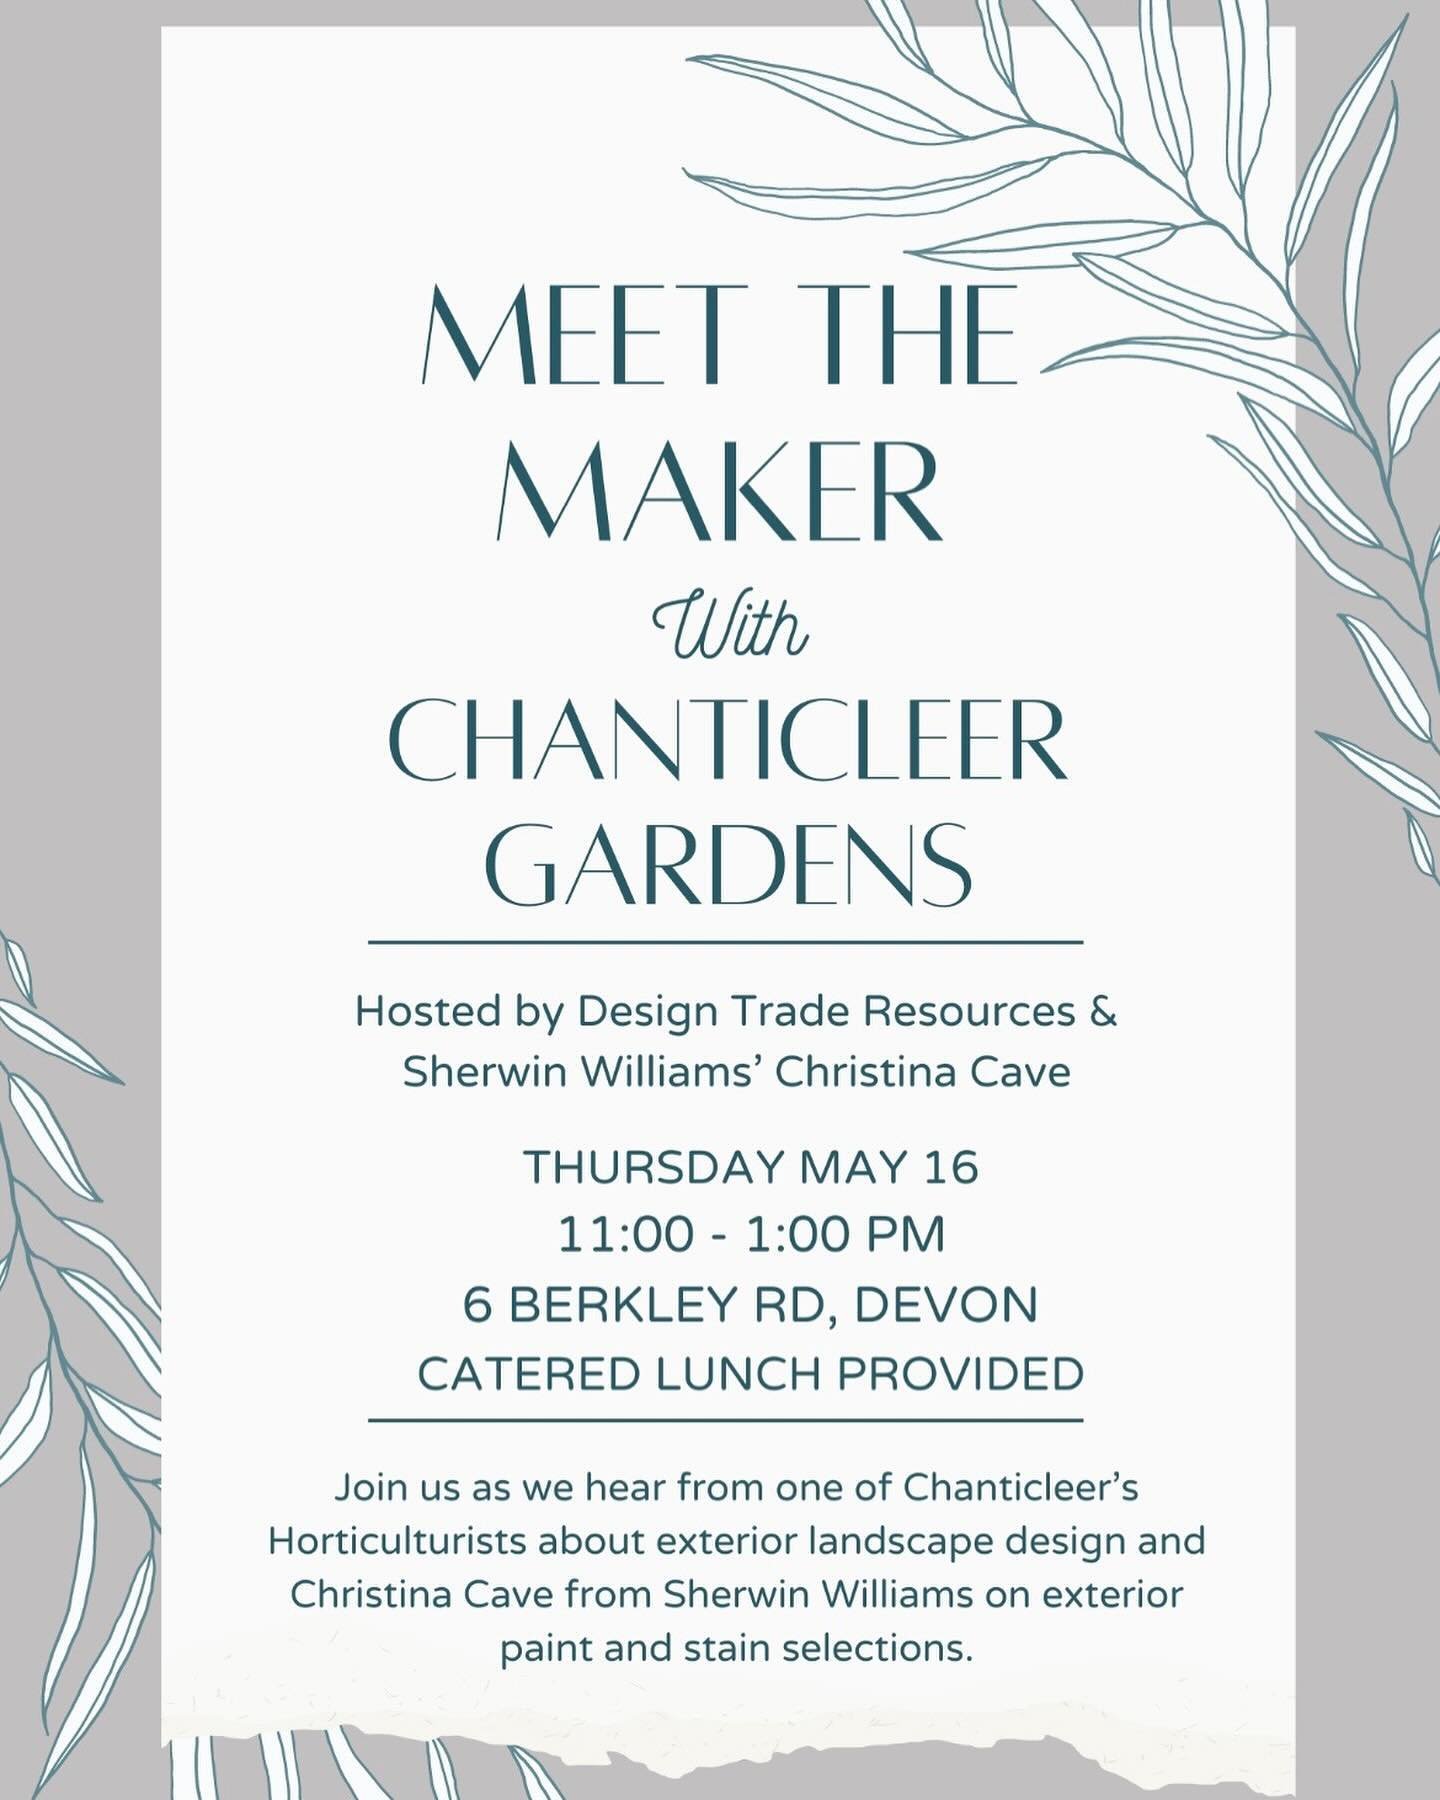 We are very excited to announce our next Meet The Maker event! Please join us as we Host with Christina Cave from @sherwinwilliams, Chanticleer Gardens for a review on exterior landscape design &amp; paint/stain selections. This will be our last big 